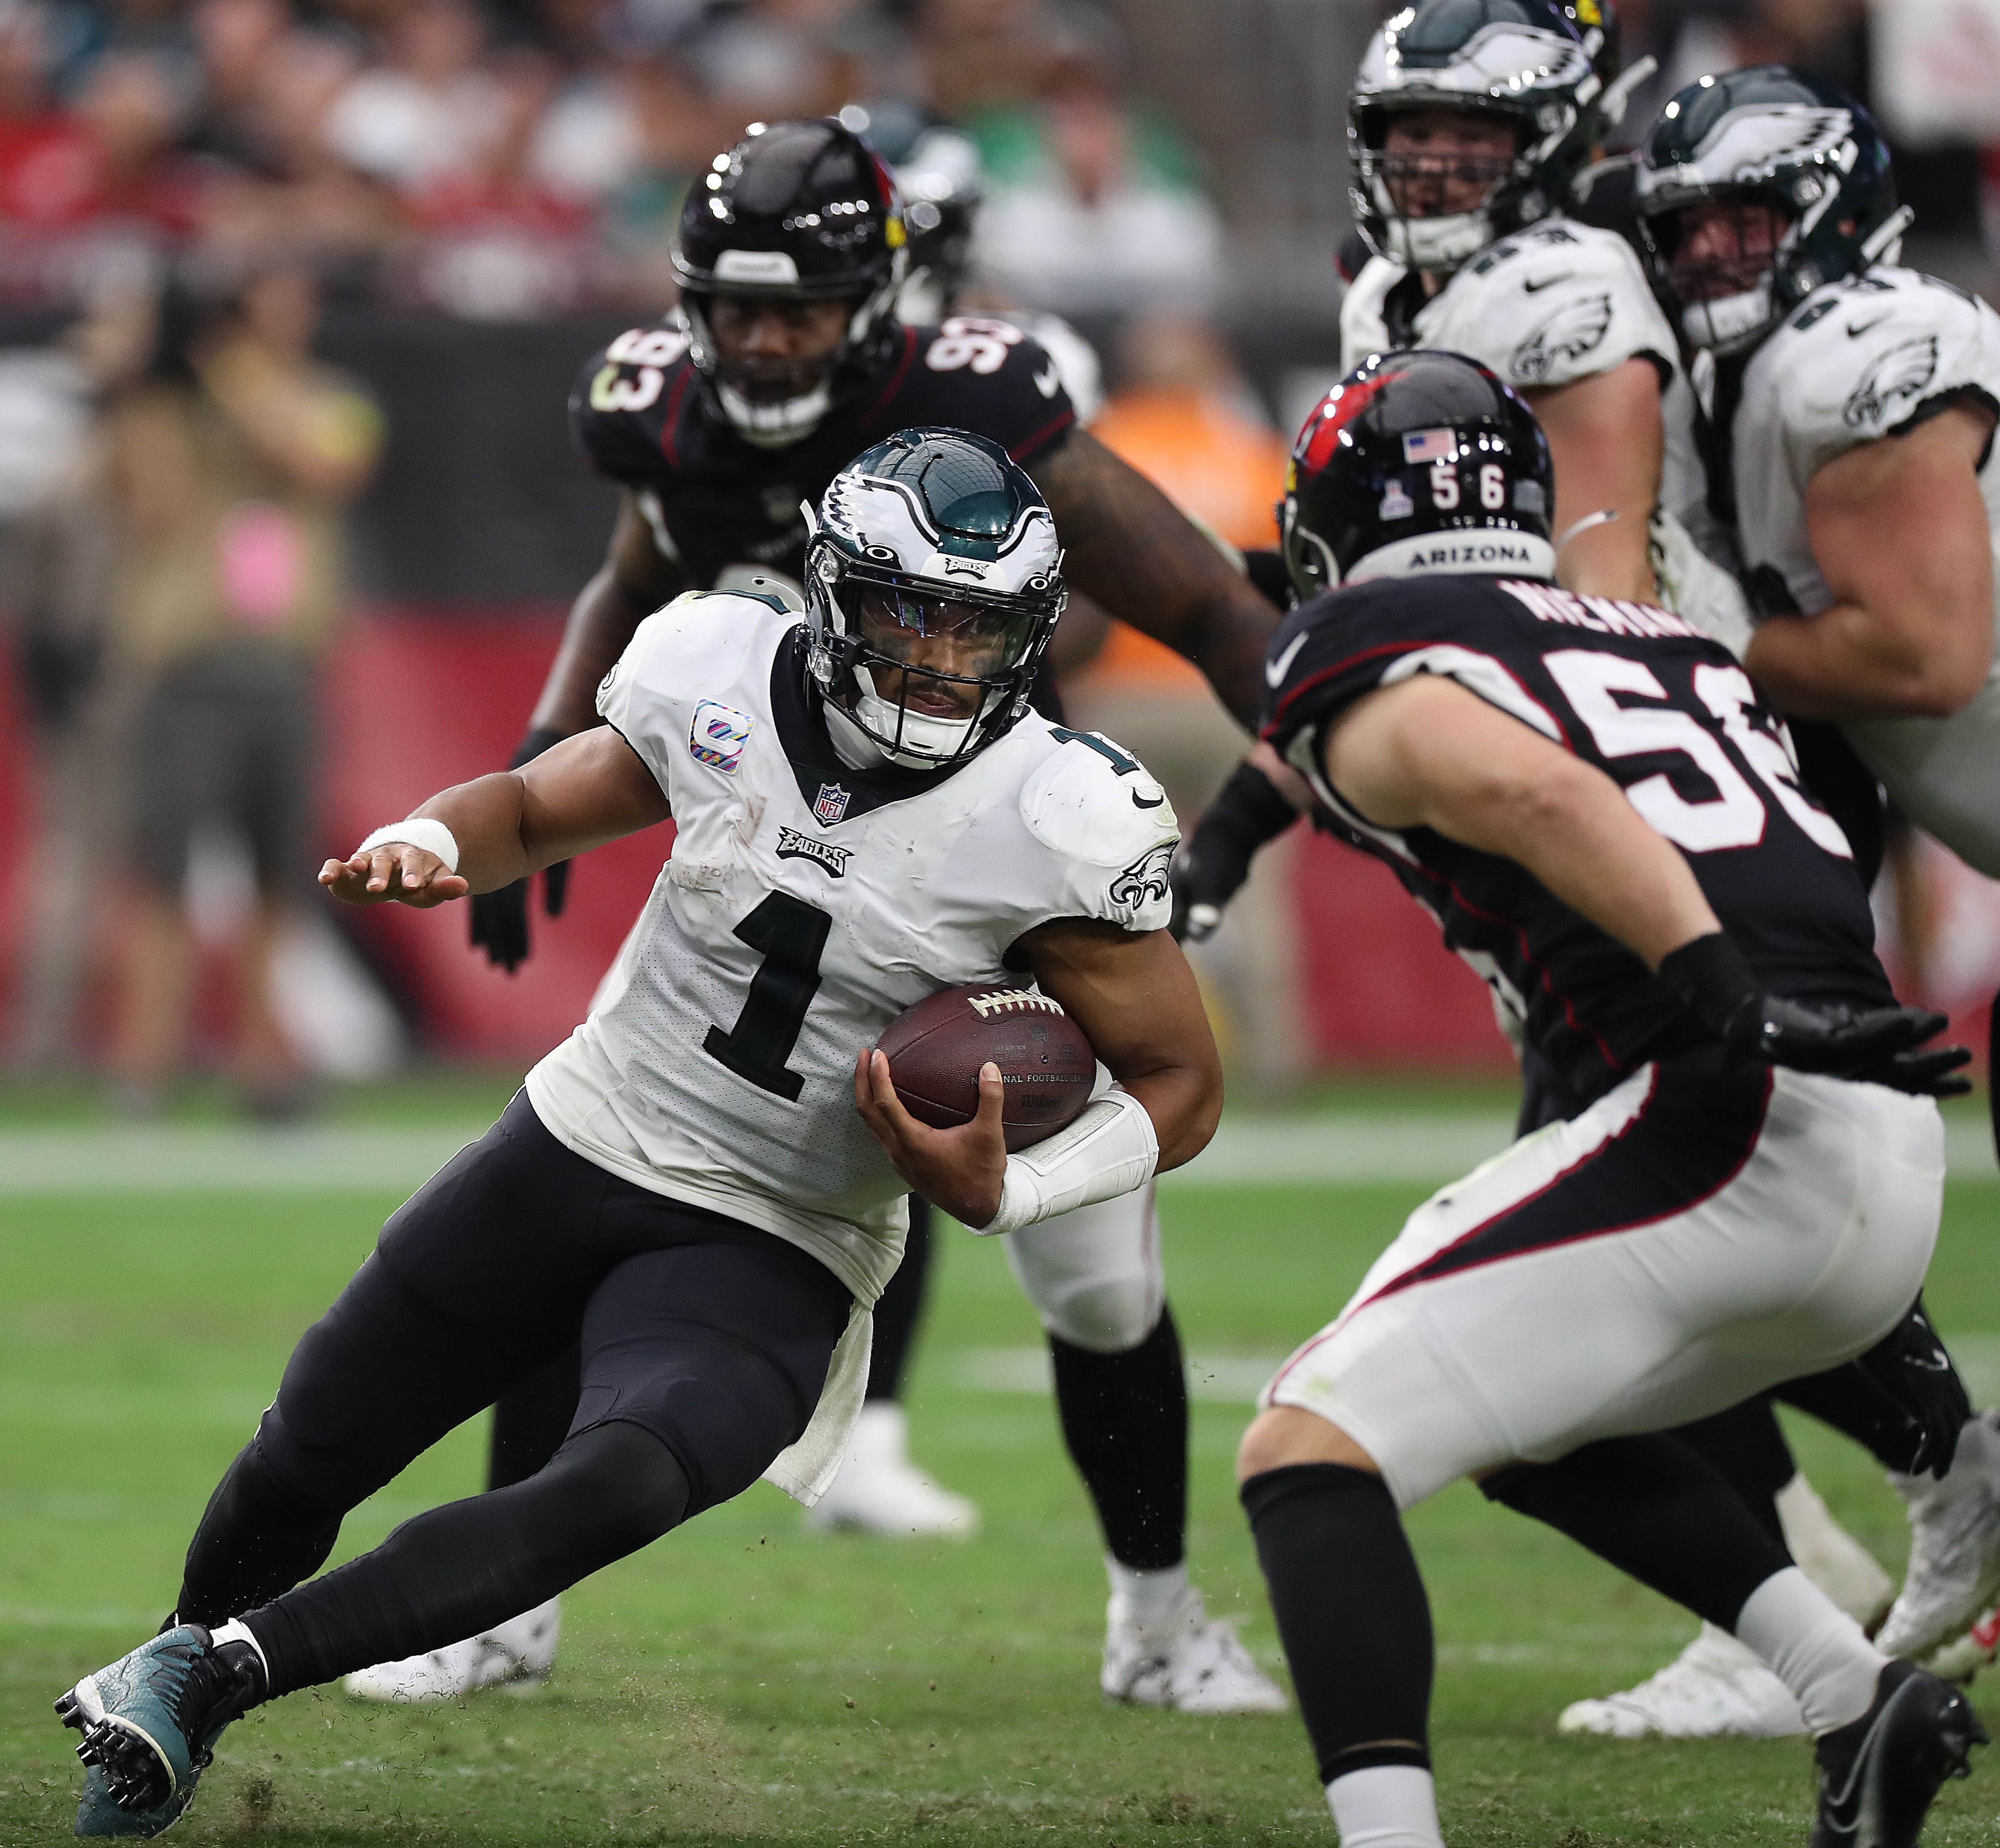 Eagles stay undefeated, hang on to beat Cardinals 20-17